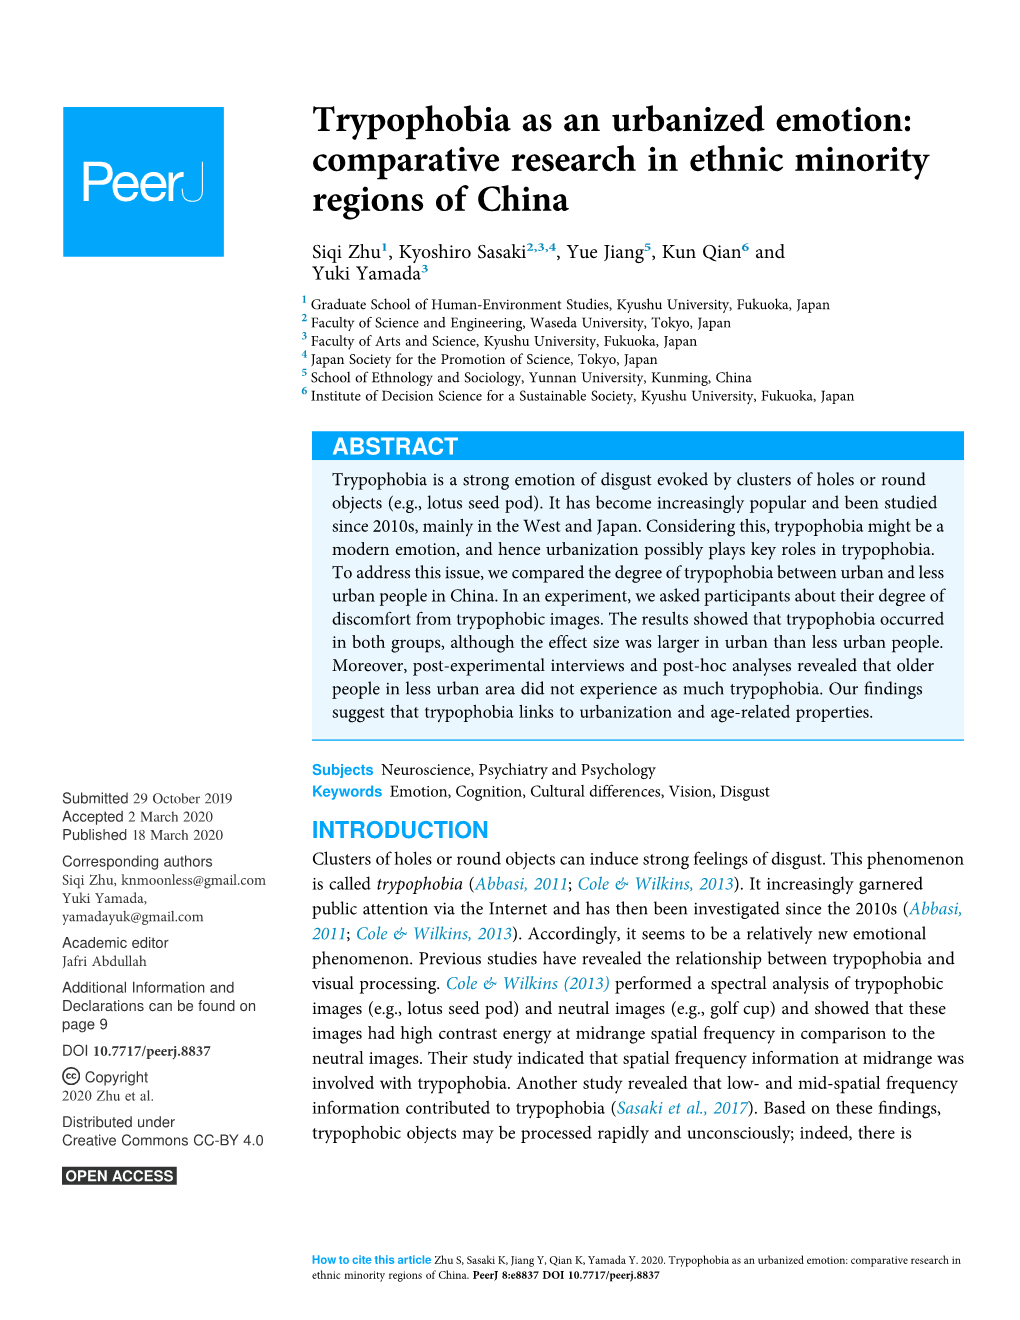 Comparative Research in Ethnic Minority Regions of China